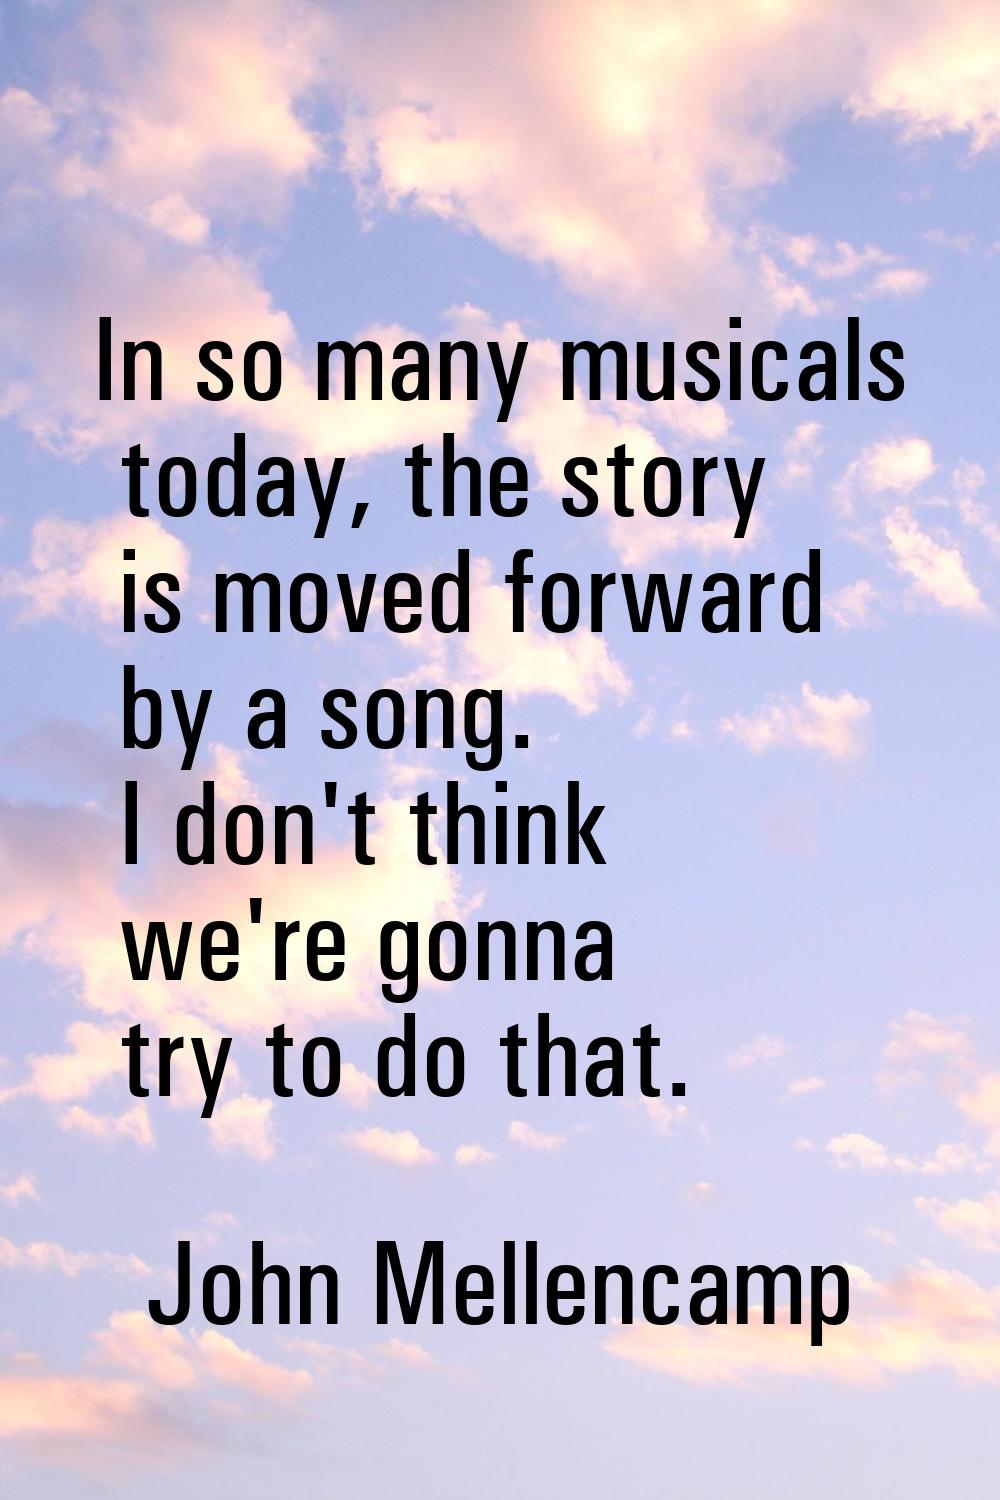 In so many musicals today, the story is moved forward by a song. I don't think we're gonna try to d